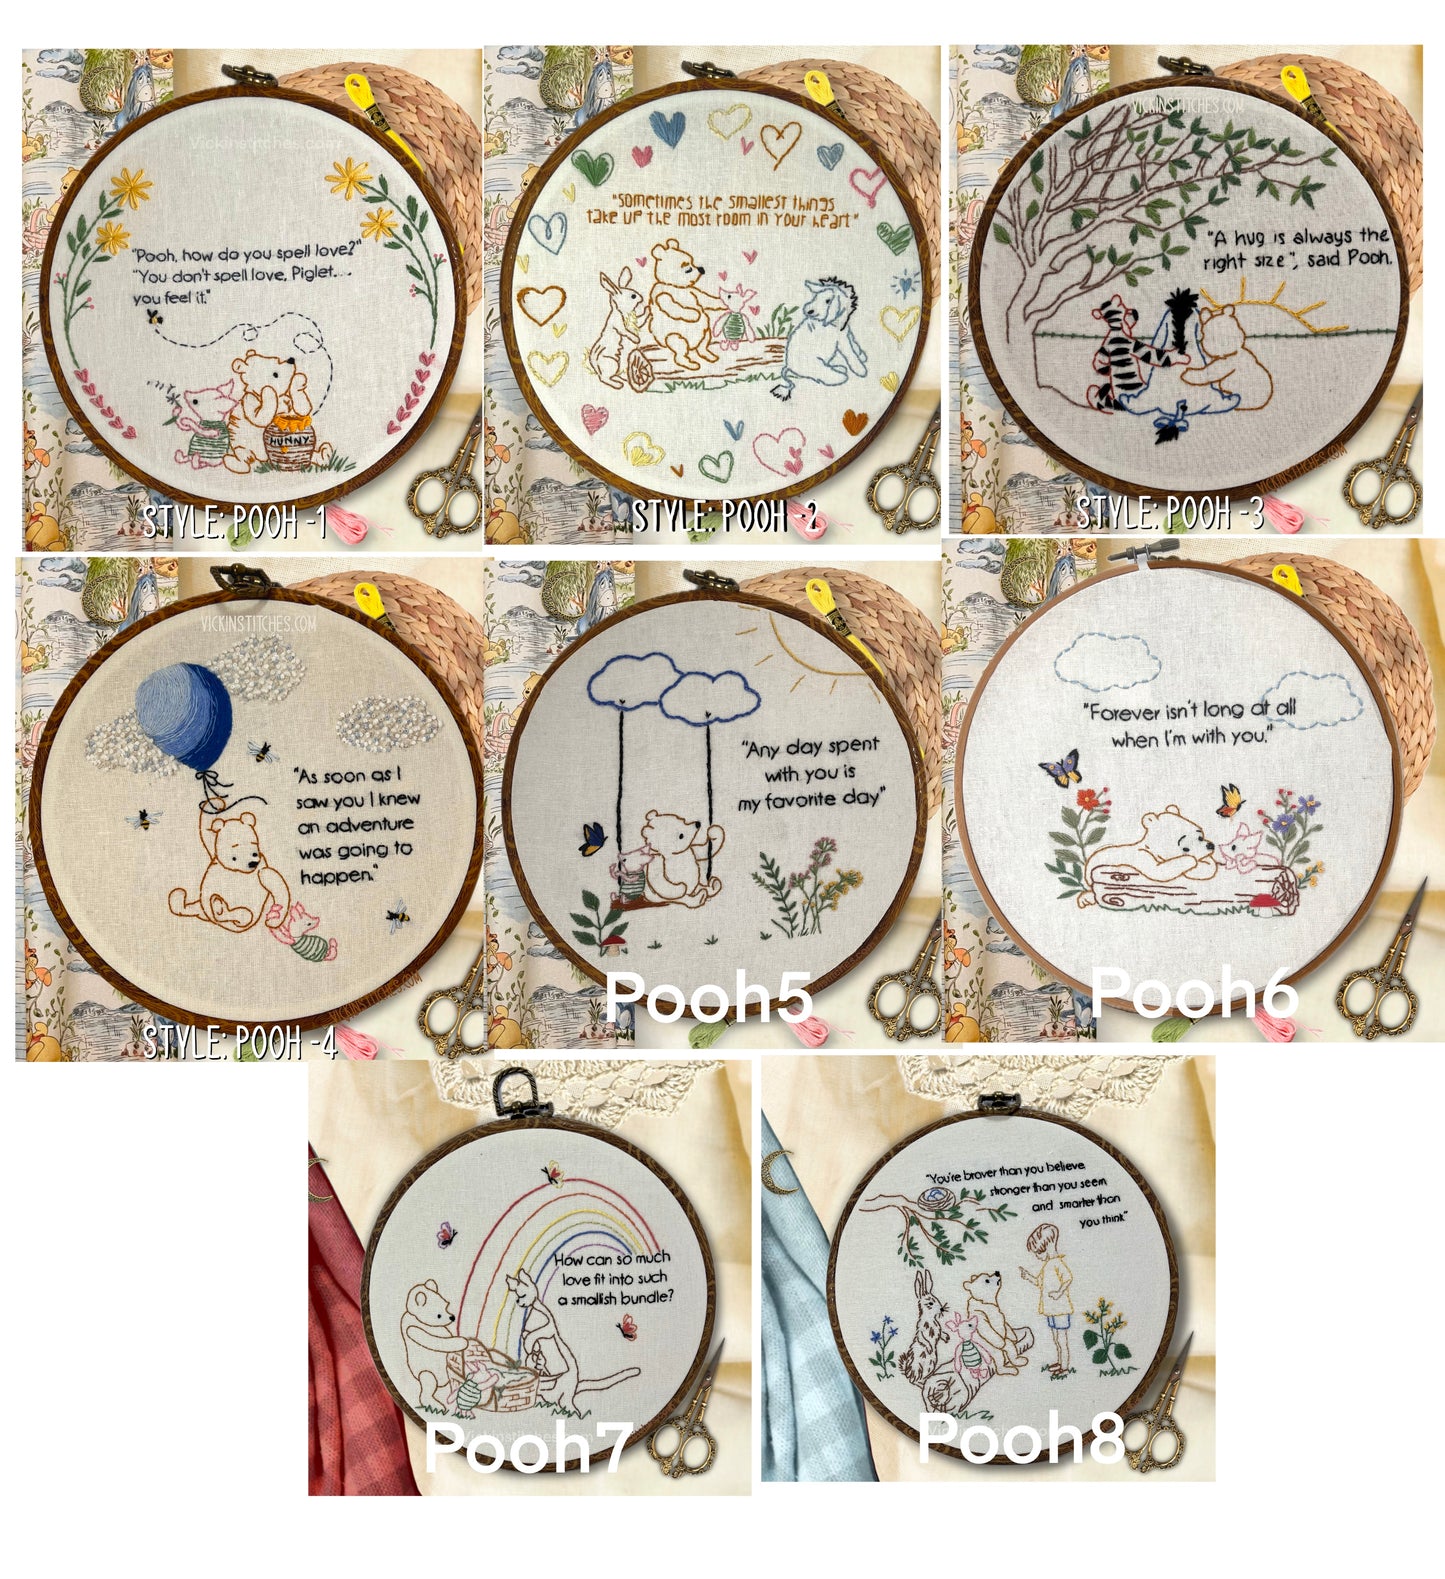 New!  Winnie the Pooh 14” Pillow Embroidery Kit - Perfect for Baby Nursery or Child's Room Decor! Easy to learn embroidery kits